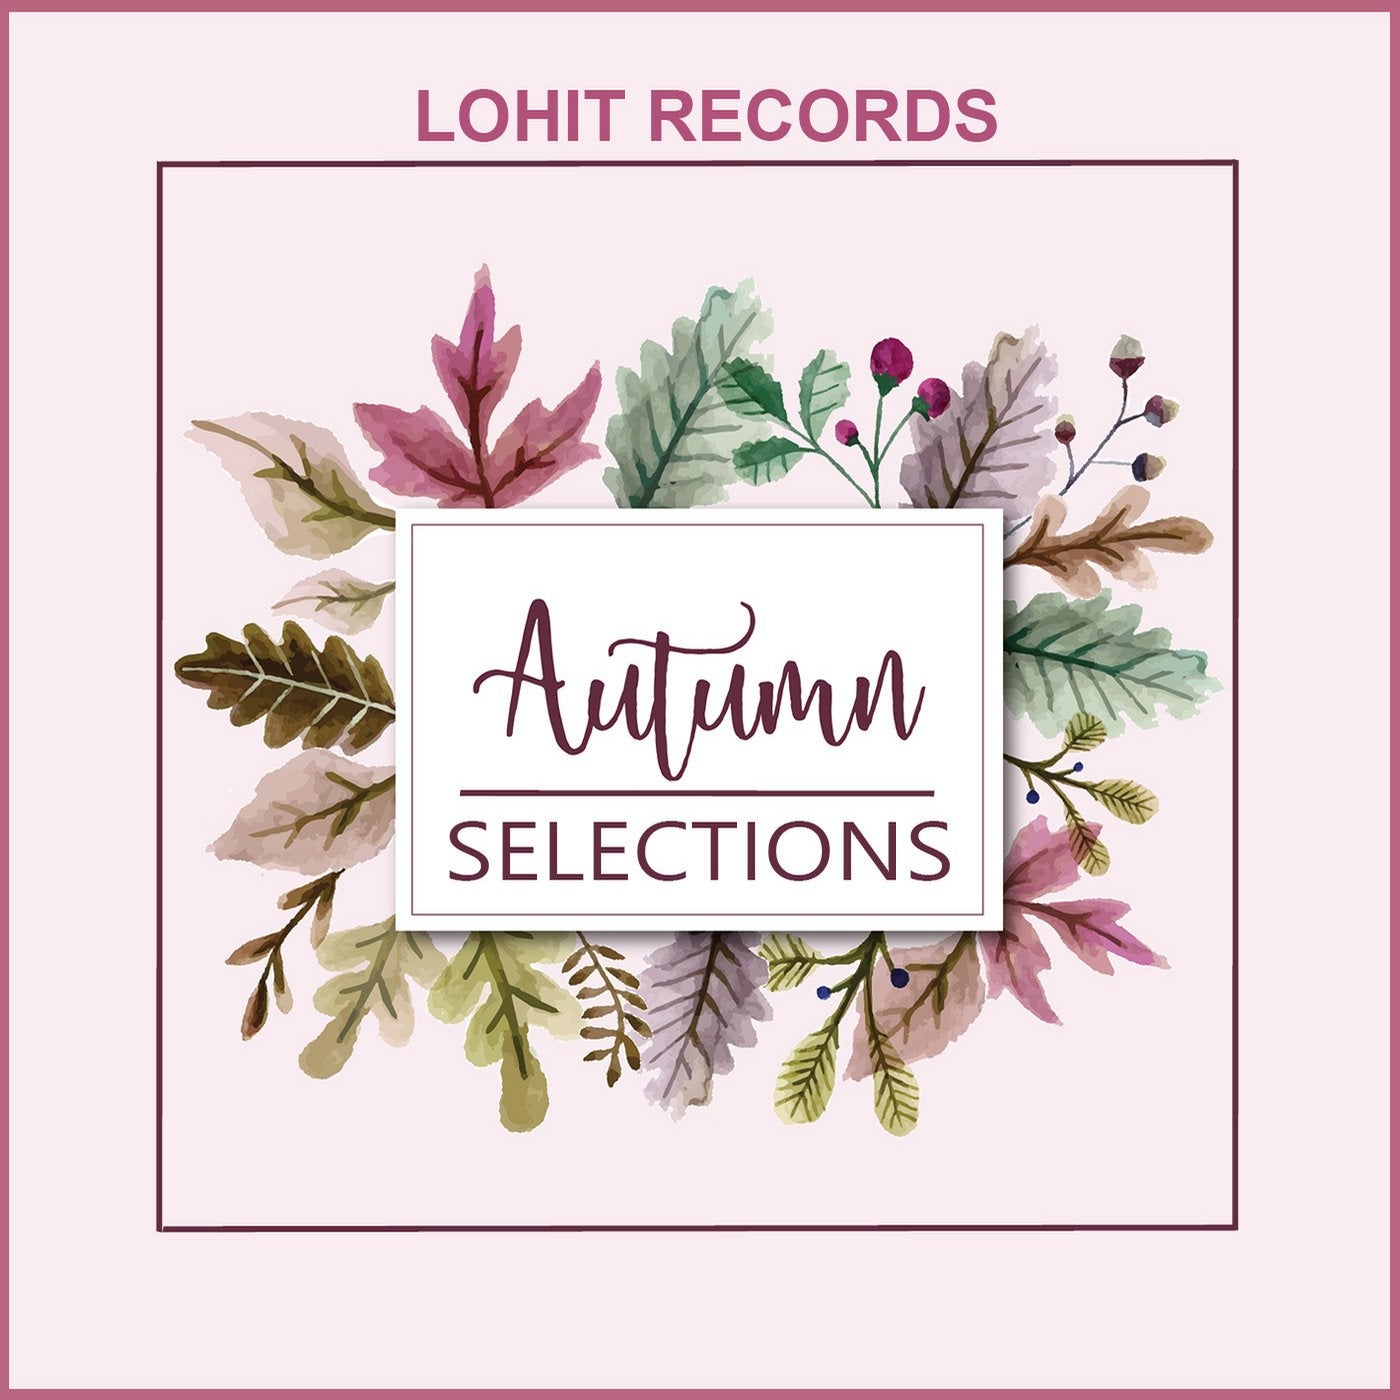 Autumn Selections